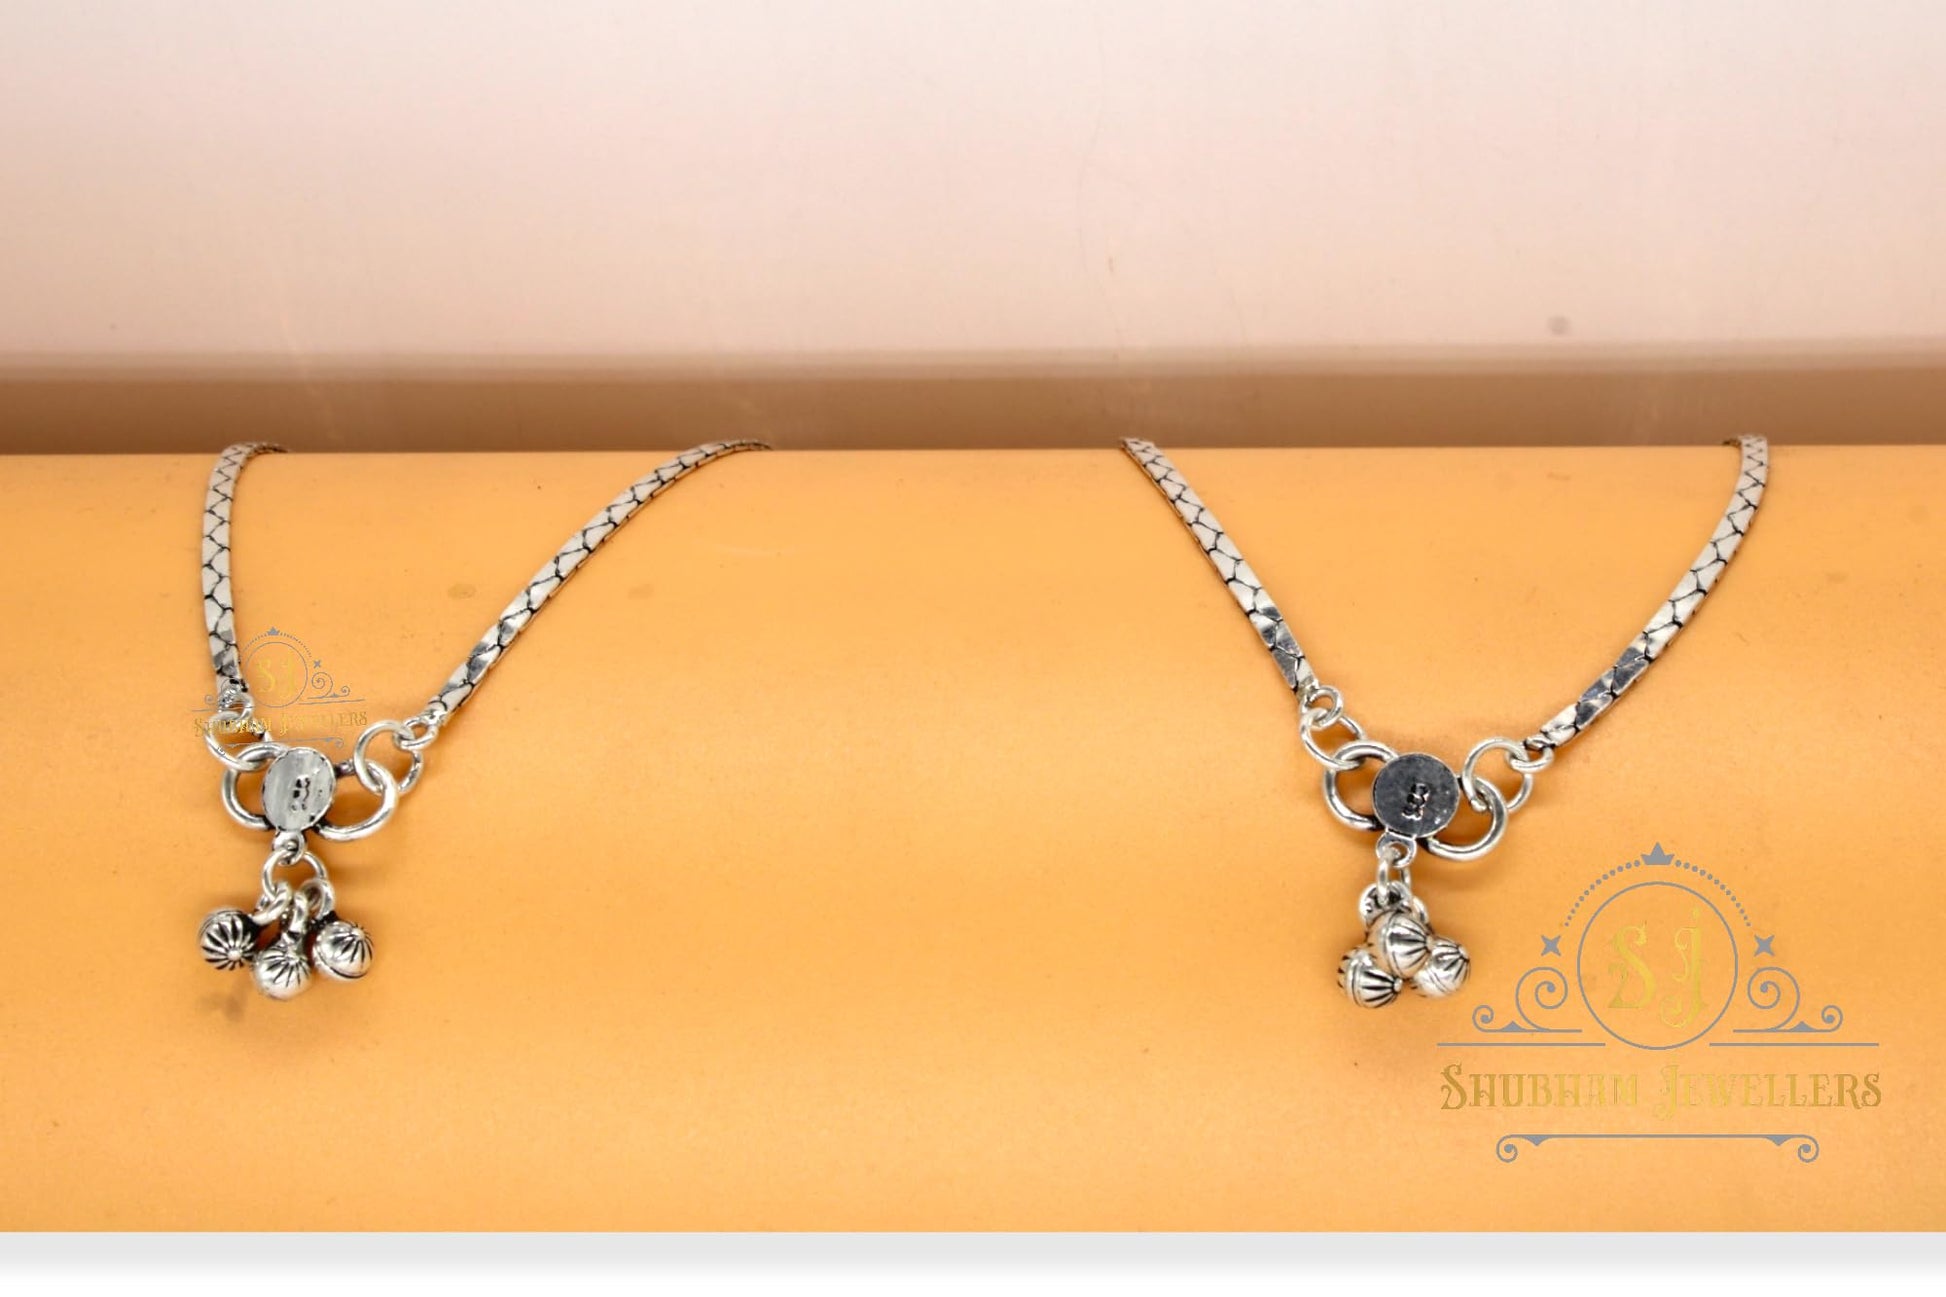 JEWELYAARI™ 925 Silver Vintage charm anklets handmade chain anklet Payal crafted from sterling silver for Womens and Girls - JewelYaari By Shubham Jewellers